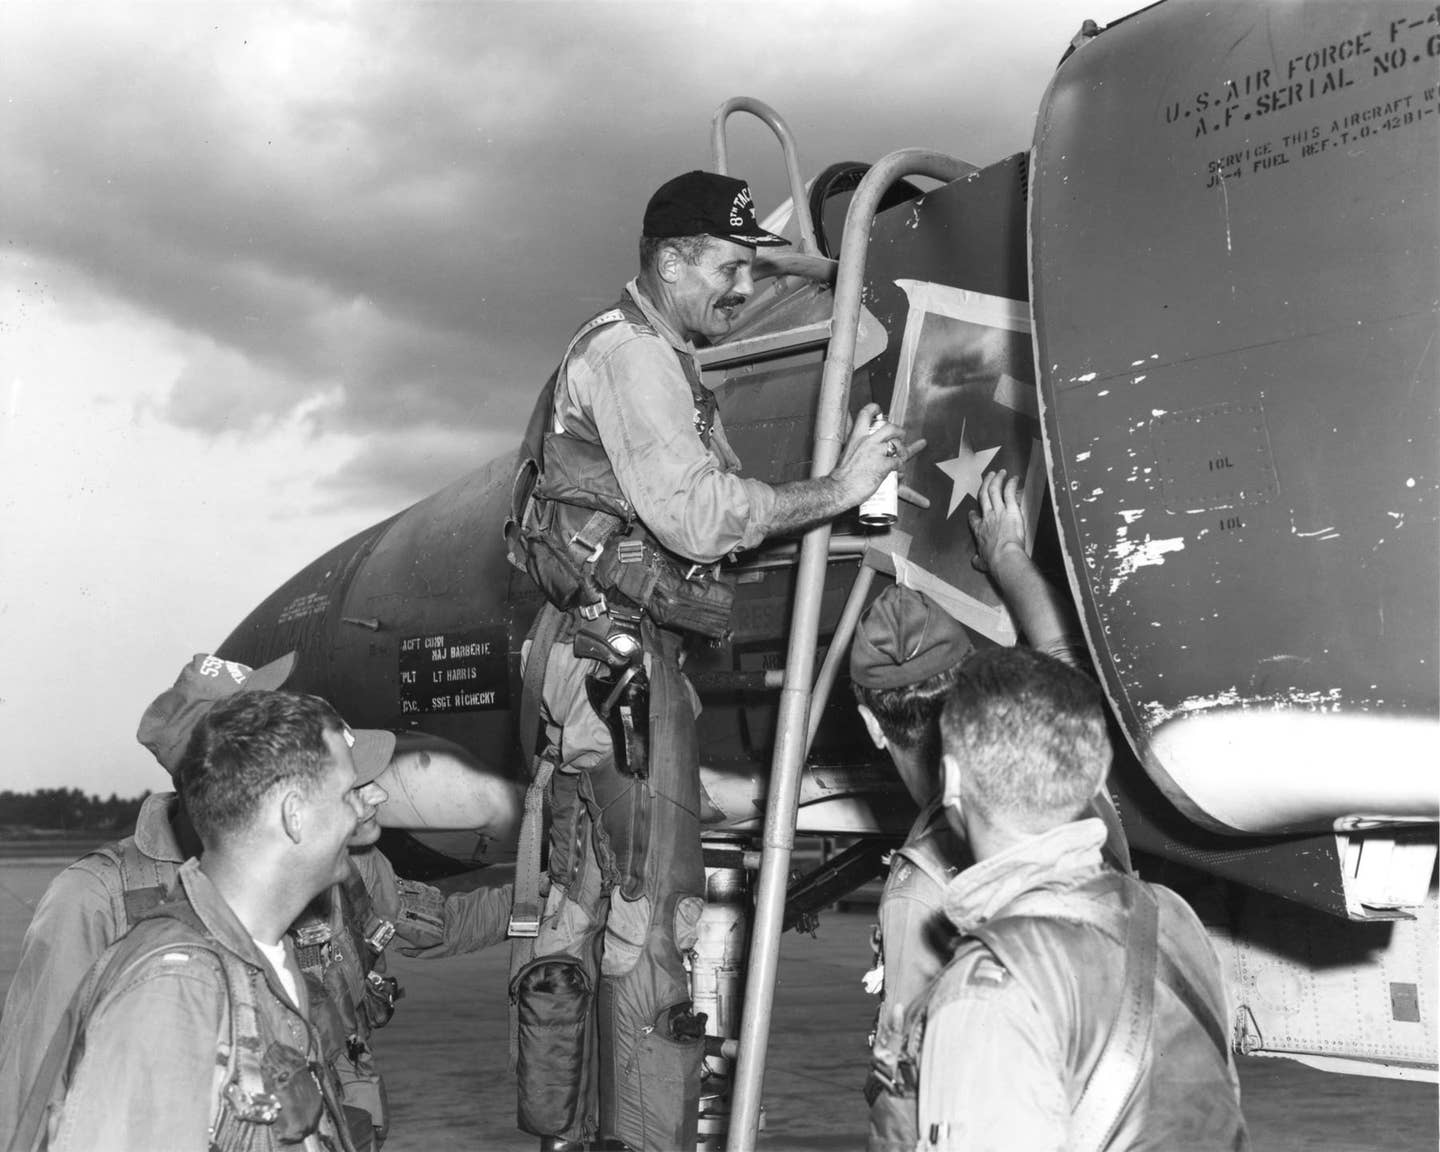 Col. Robin Olds adds a victory star on the F-4 he was flying on May 4, 1967, when he shot down a MiG-21. This was his second kill of the war. <em>U.S. Air Force photo</em><br><a href="https://www.nationalmuseum.af.mil/Visit/Museum-Exhibits/Fact-Sheets/Display/Article/196007/brig-gen-robin-olds-combat-leader-and-fighter-ace/undefined"></a>